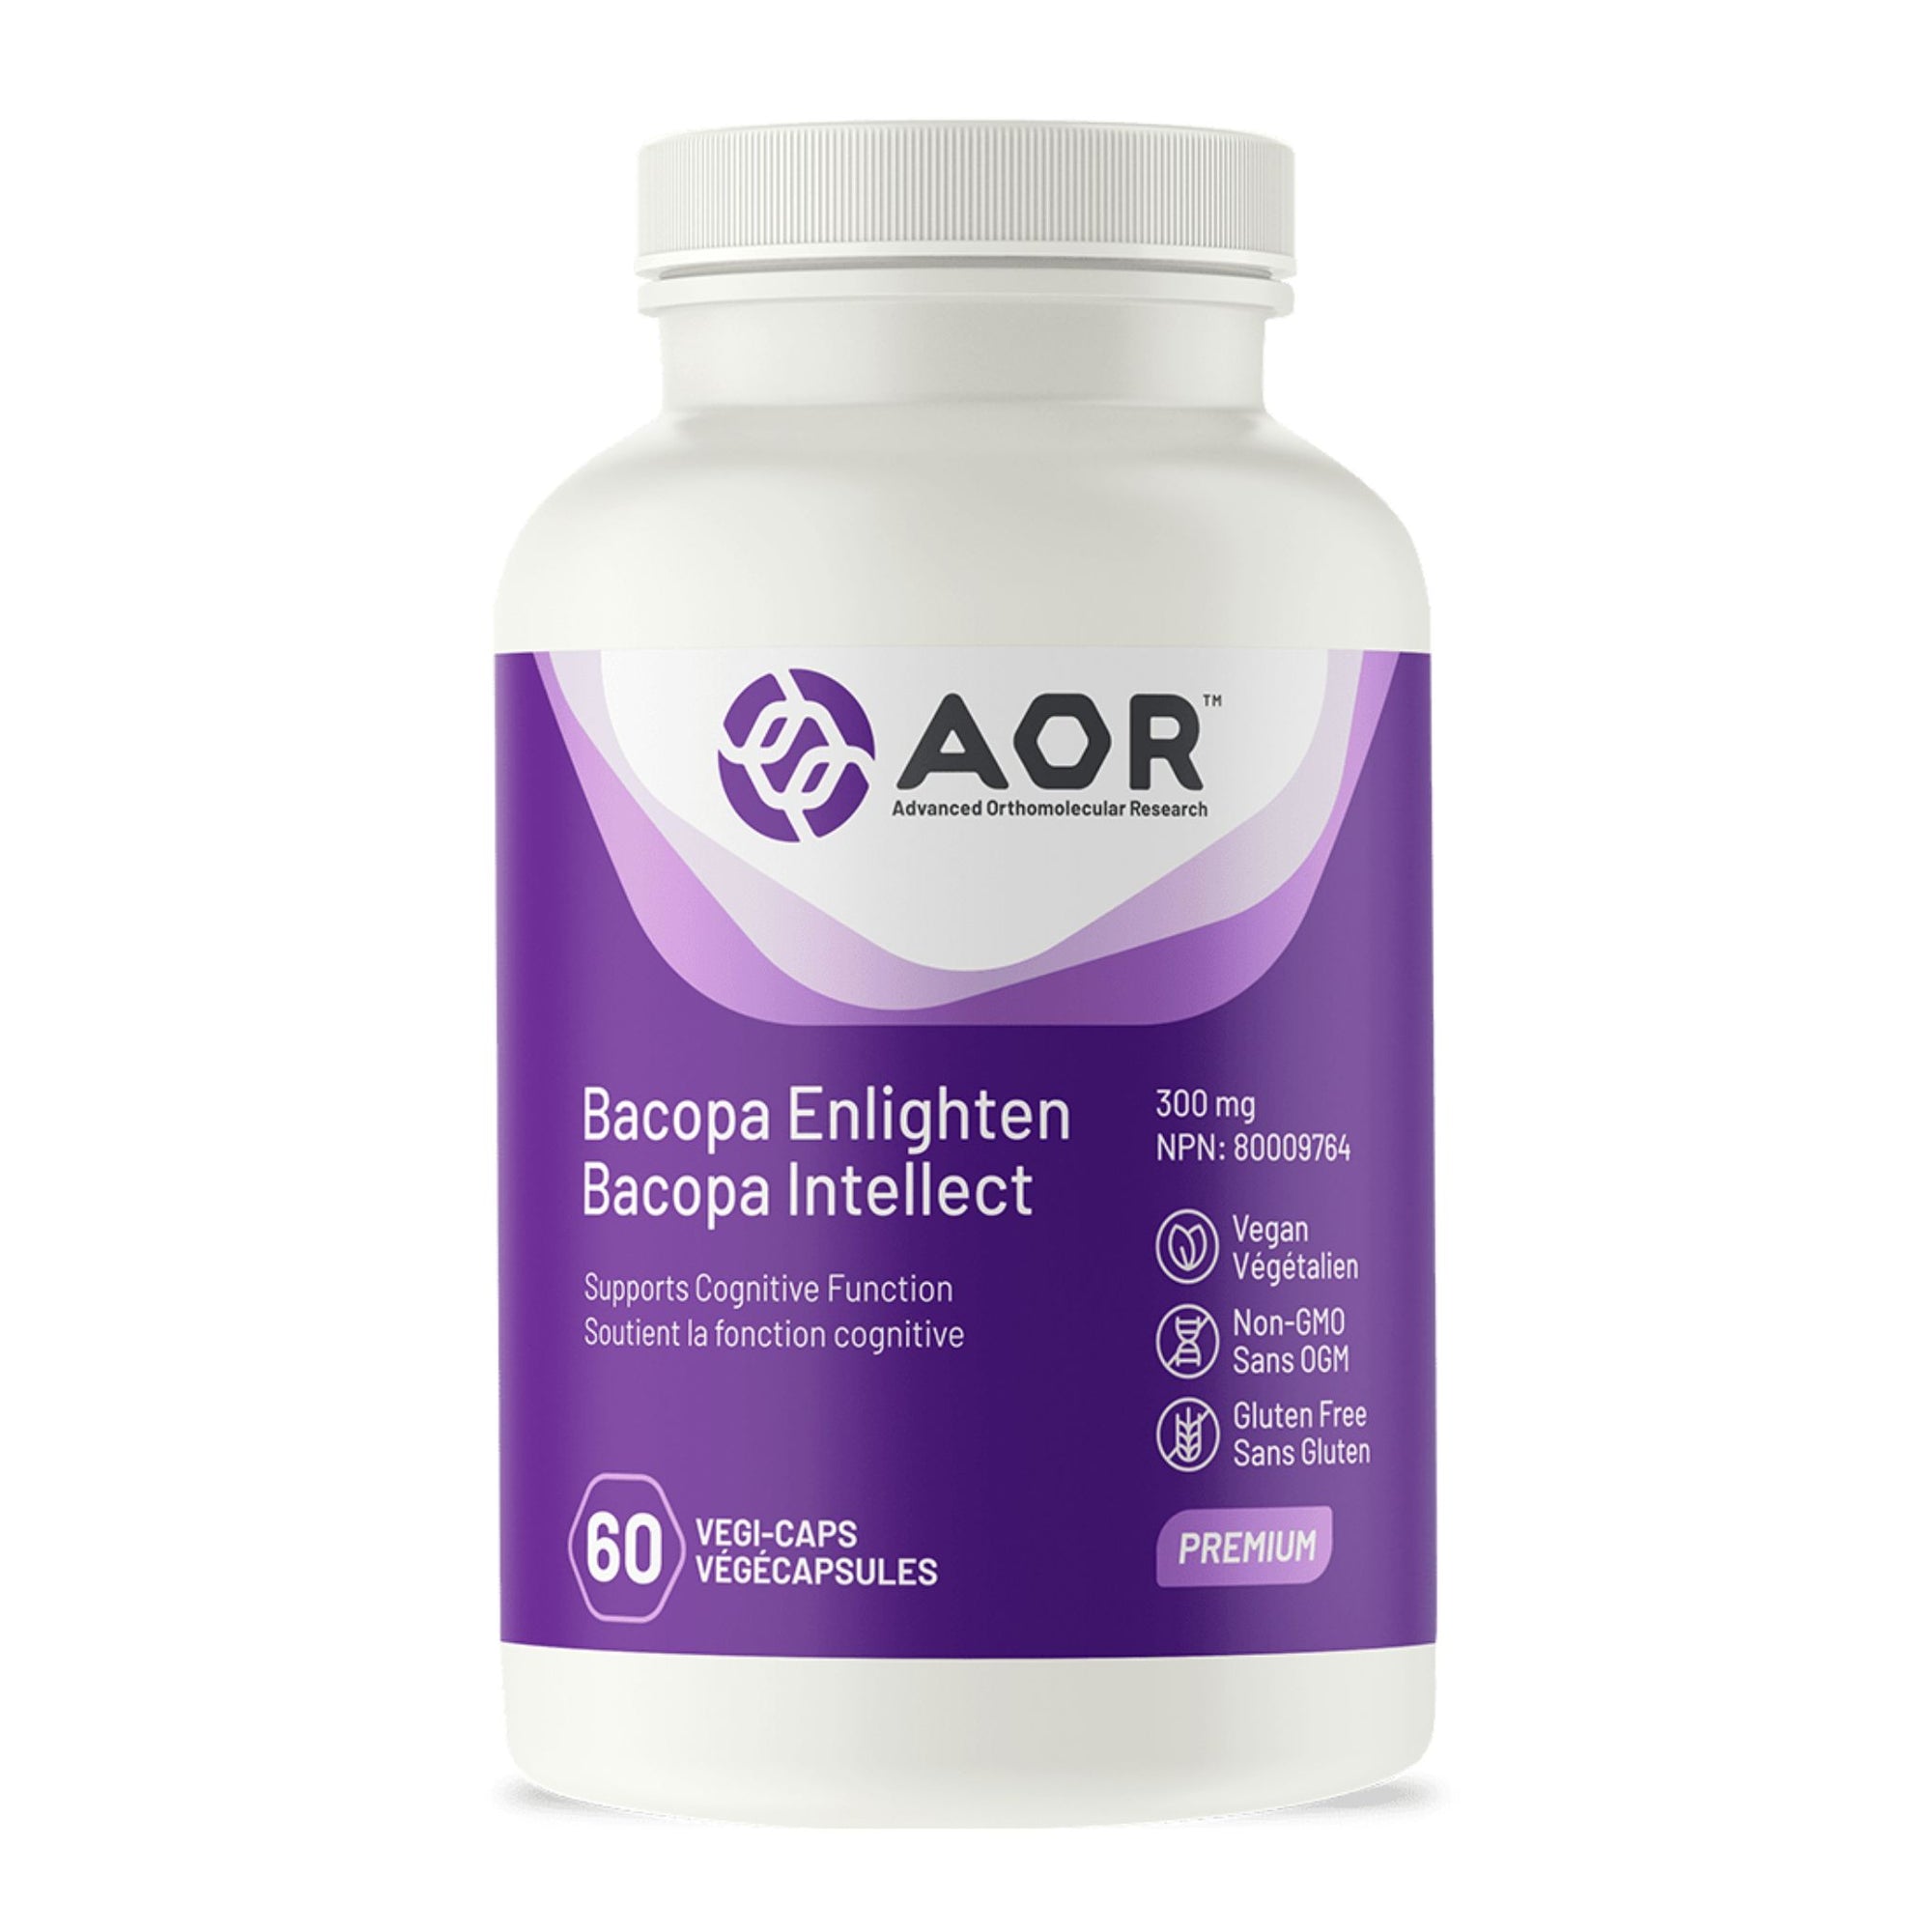 AOR Bacopa Enlighten 60 vegetable capsules - a supplement that supports cognitive function - vegan, gluten free, non-GMO